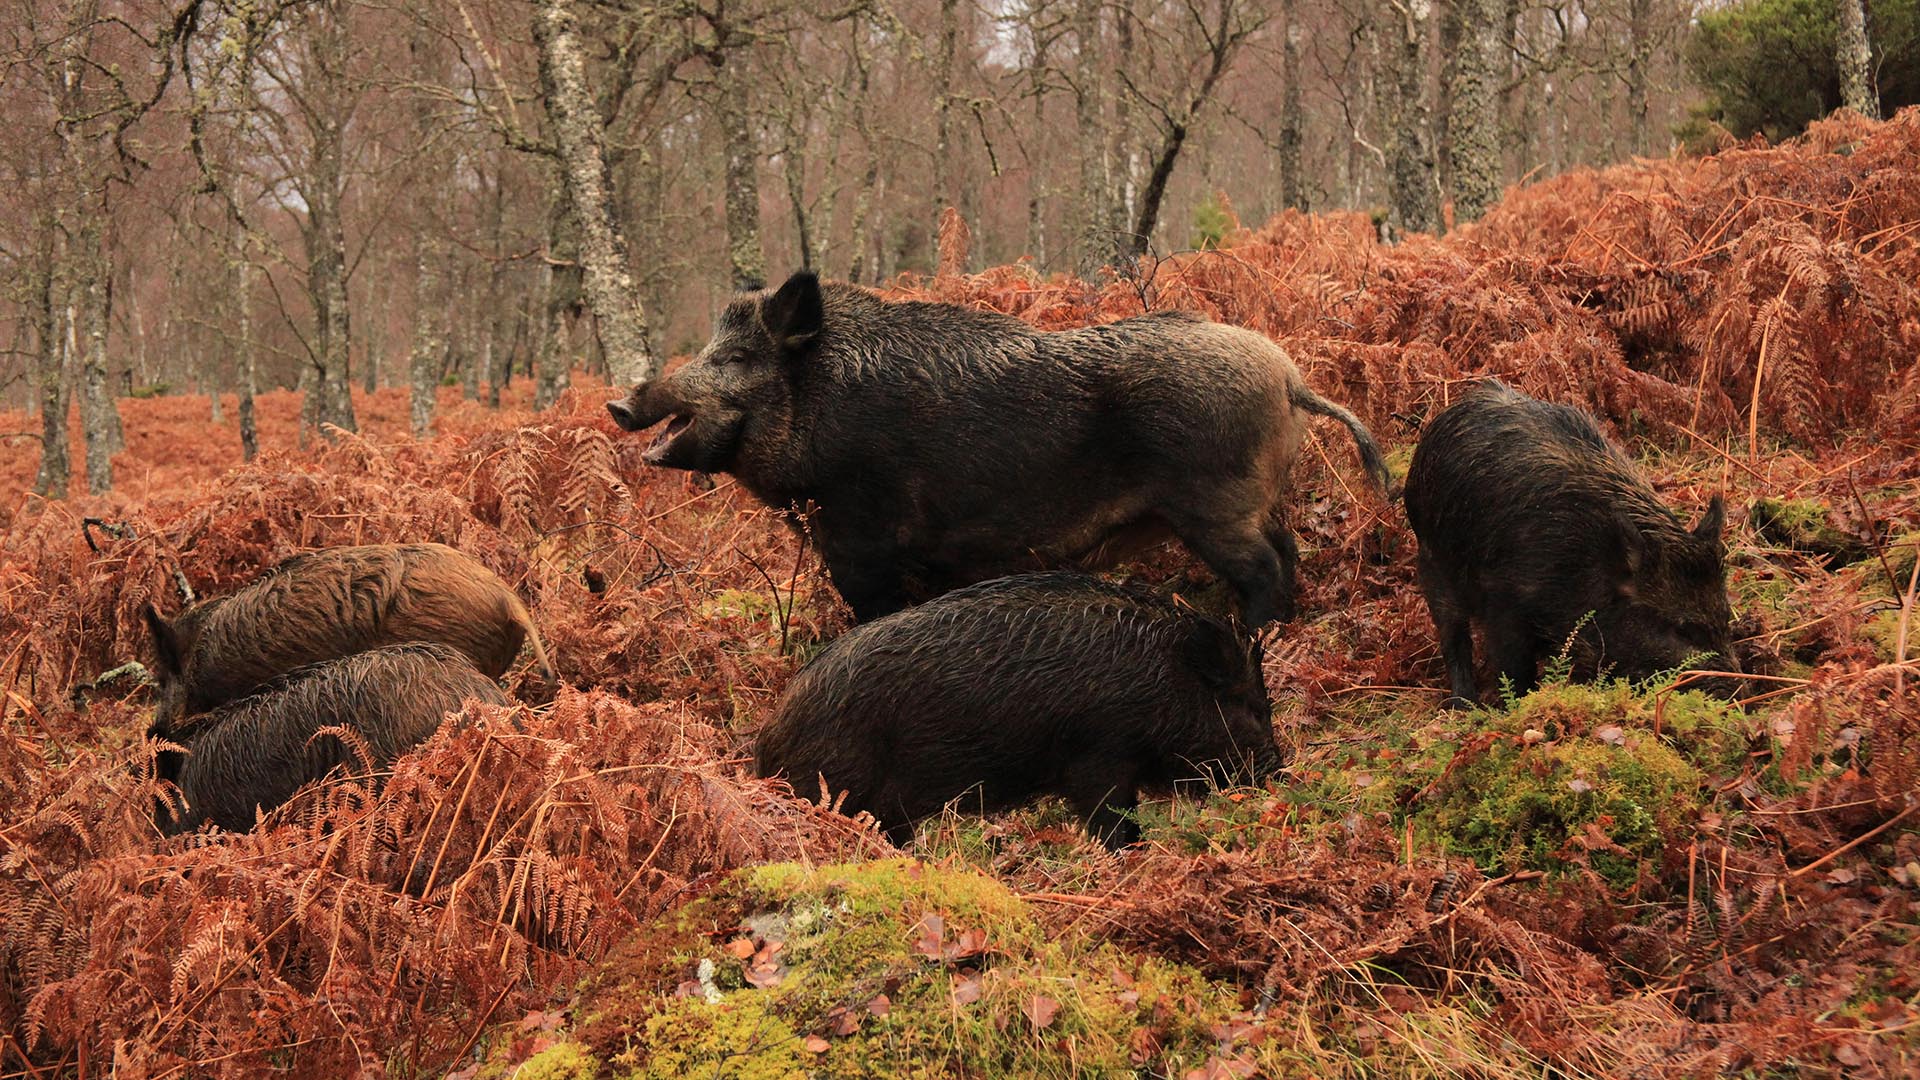 Wild boar mythology and folklore | Trees for Life